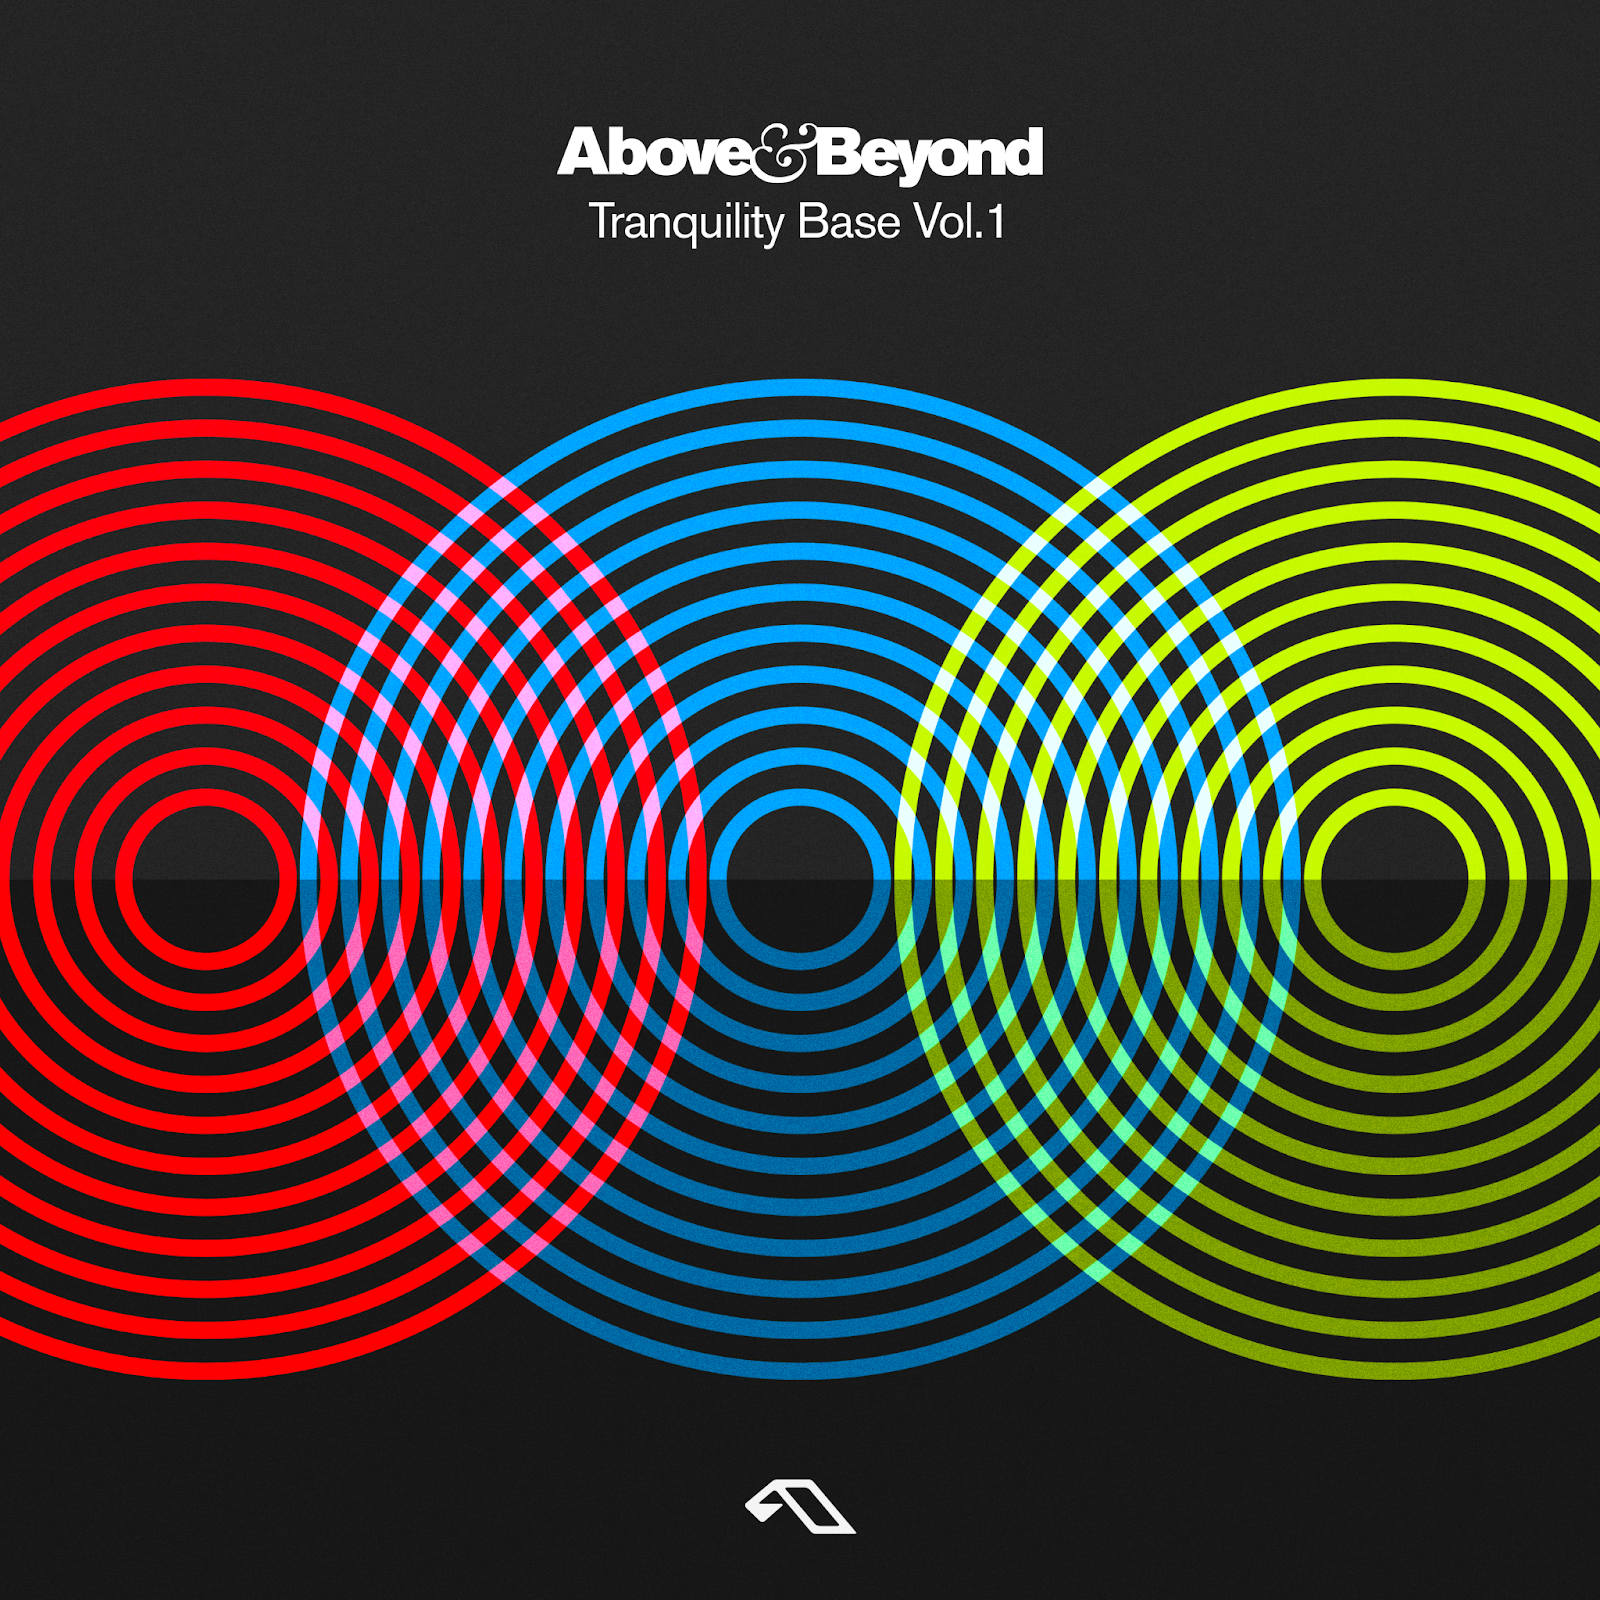 Above and Beyond presents Tranquility Base volume 1 EP on Anjunabeats